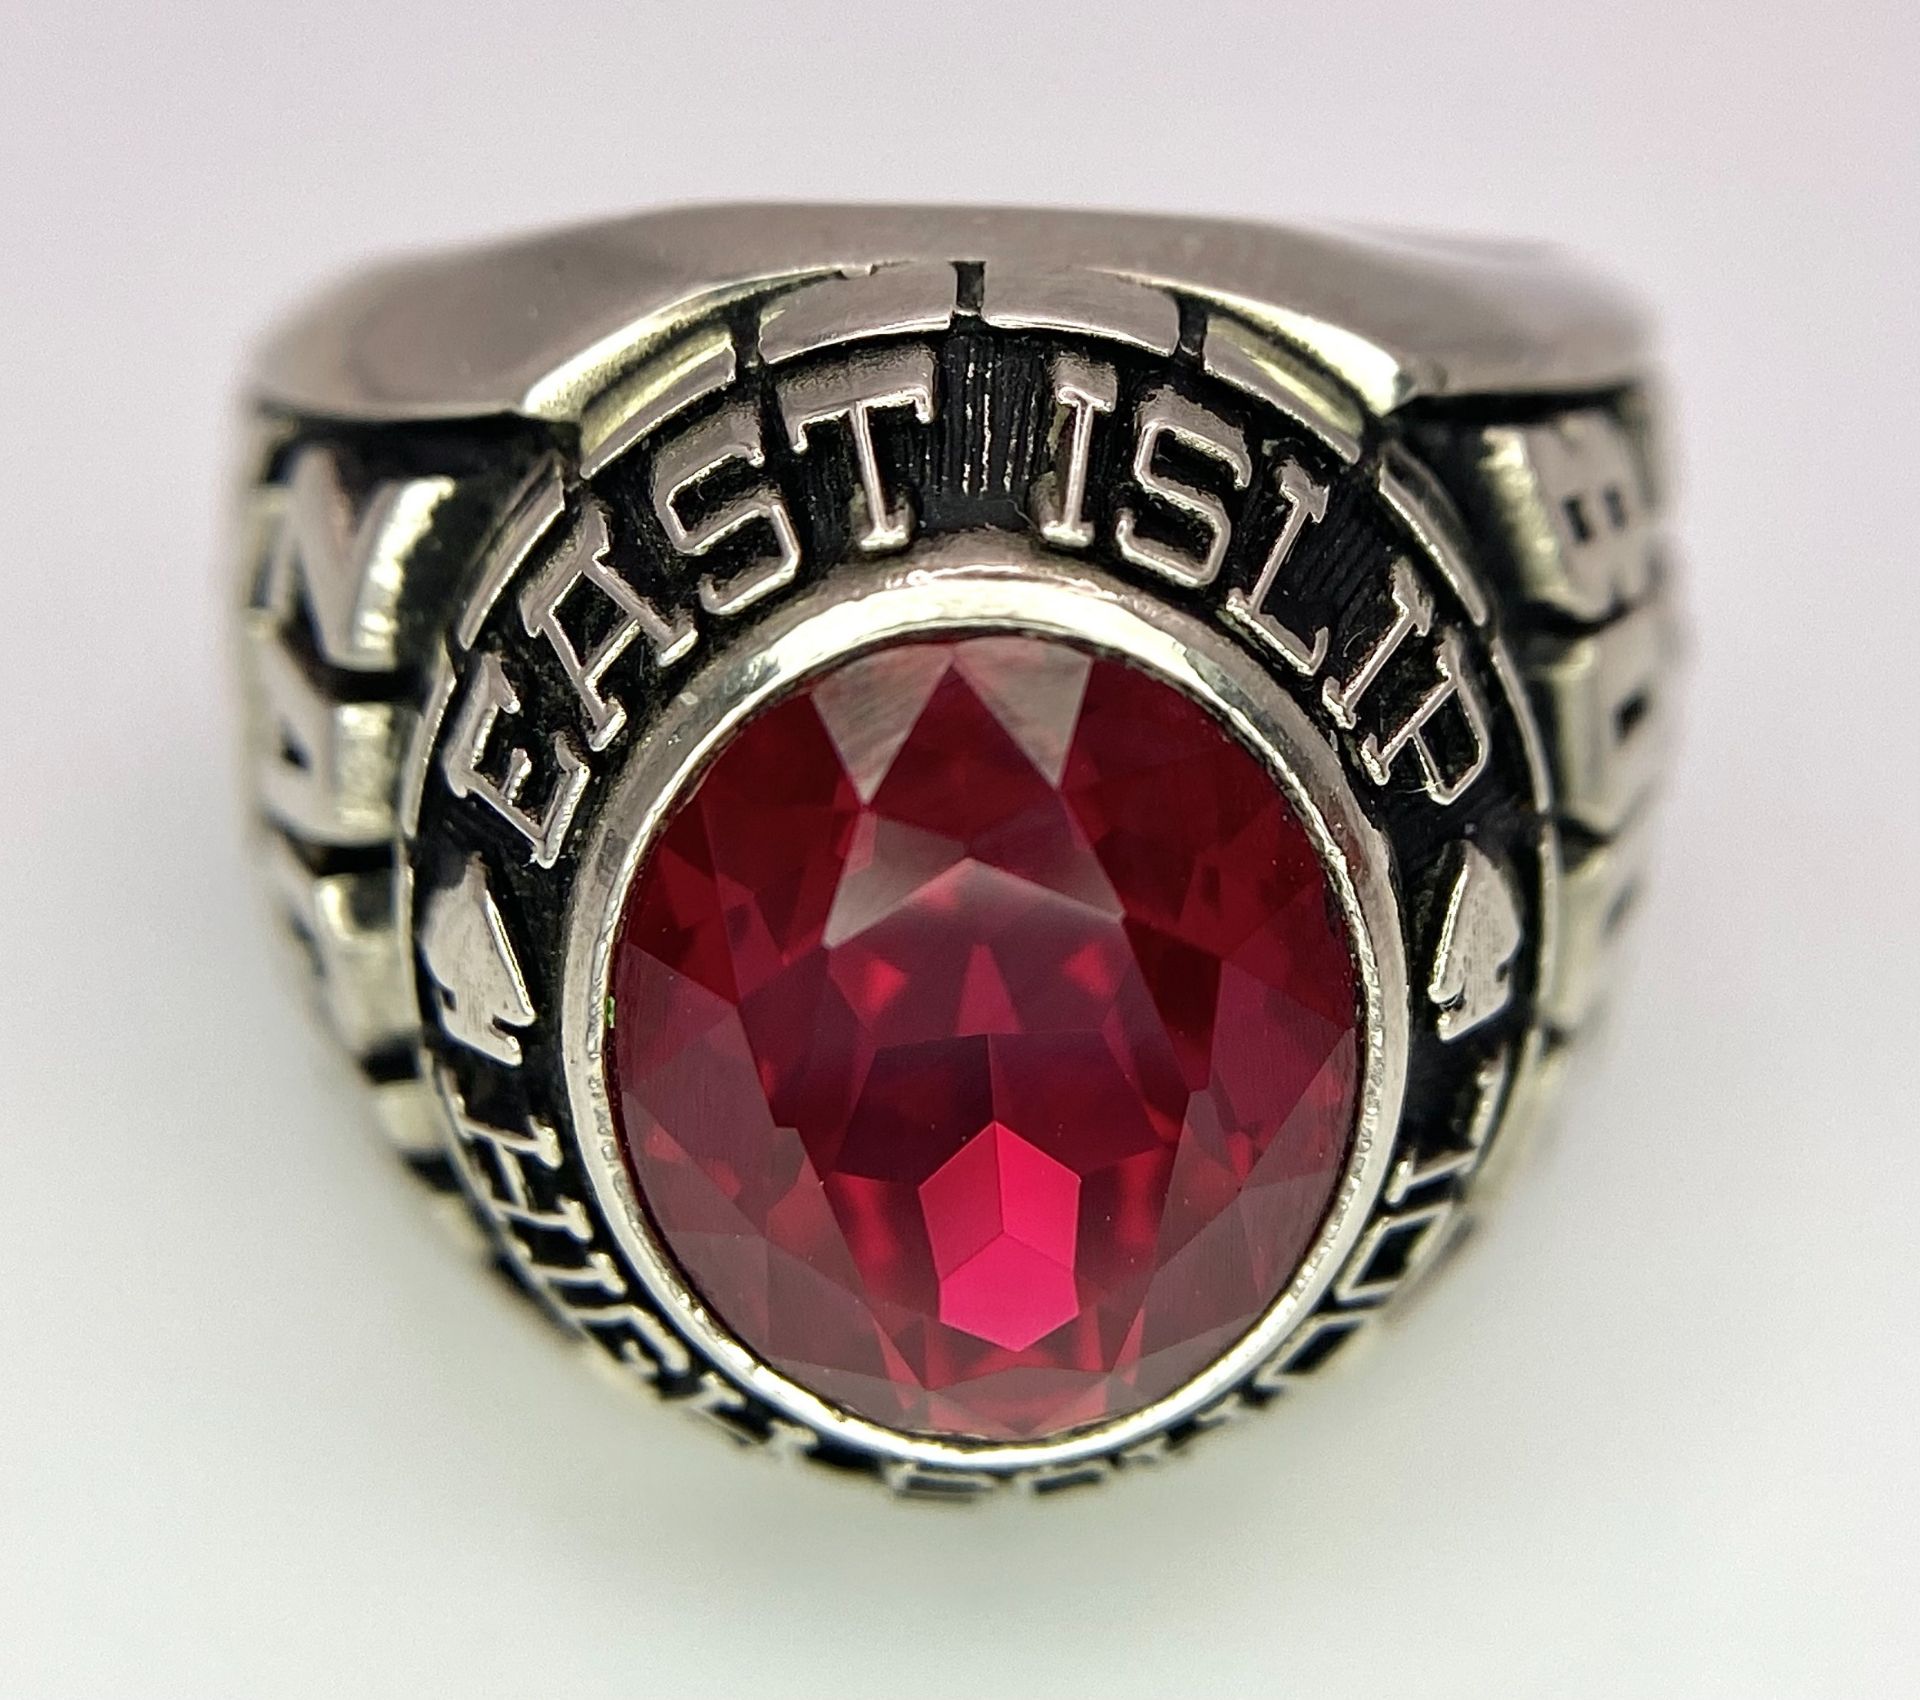 A 10K White Gold and Ruby Gents High School Ring. Size P 1/2. 18g total weight. Ref: 17043 - Image 7 of 9